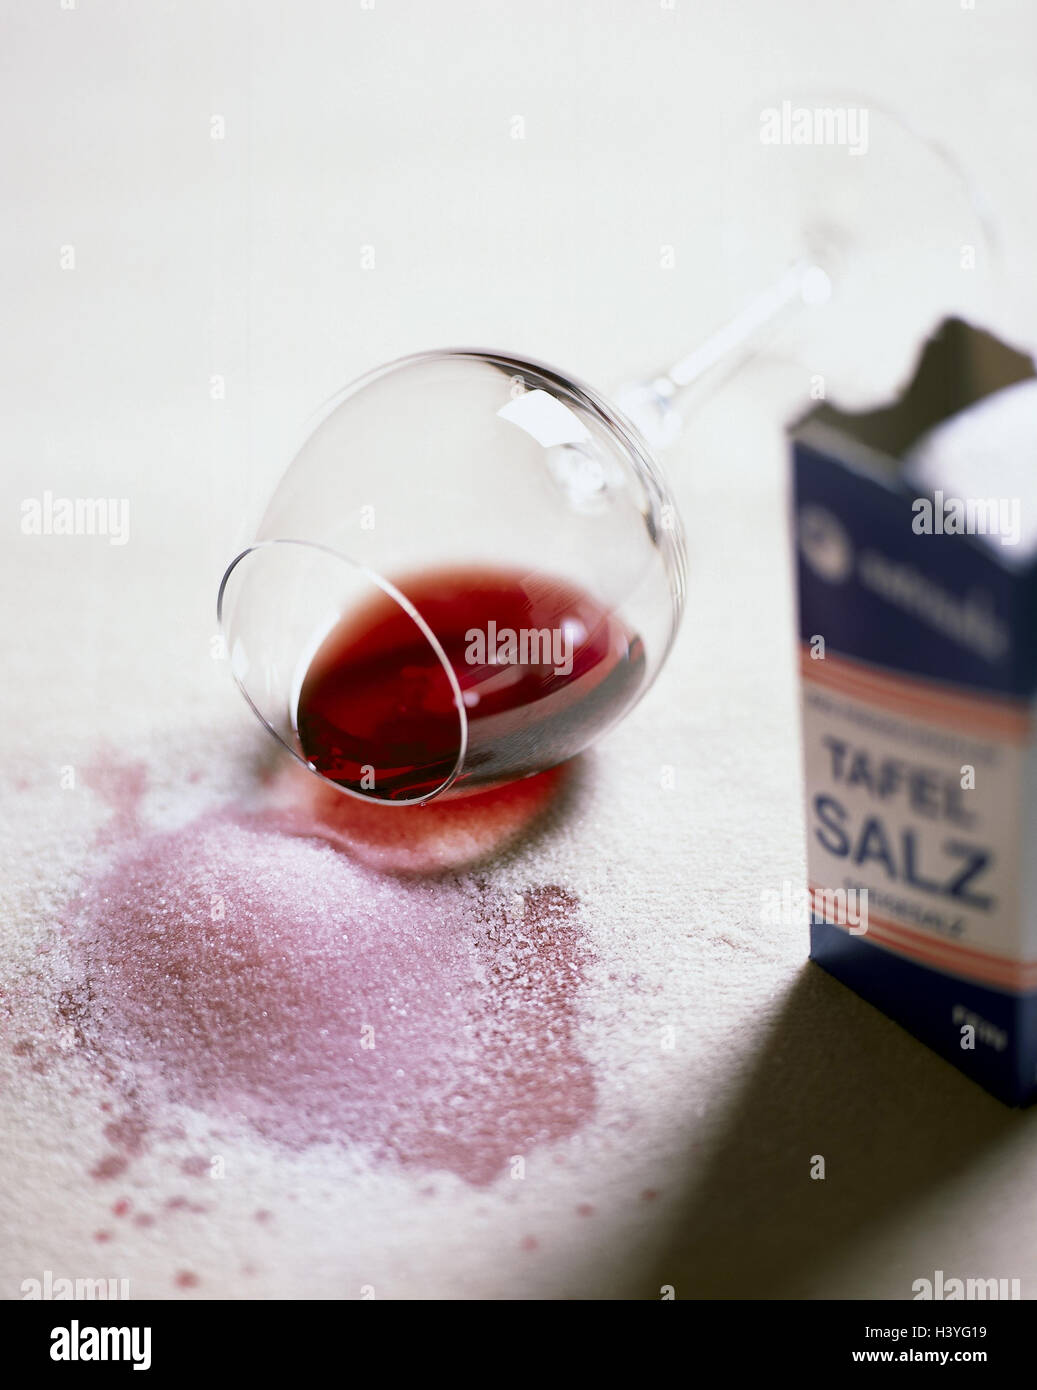 Carpet, glass, wine stain, salt, Still life, material recording, carpeted floor, floor, floor, velour, velvet-pile carpet, white, wine, red wine, red wine glass, knocked down, fallen down, buries, bad luck, annoyingly, blotch, blotch removal, house means, Stock Photo